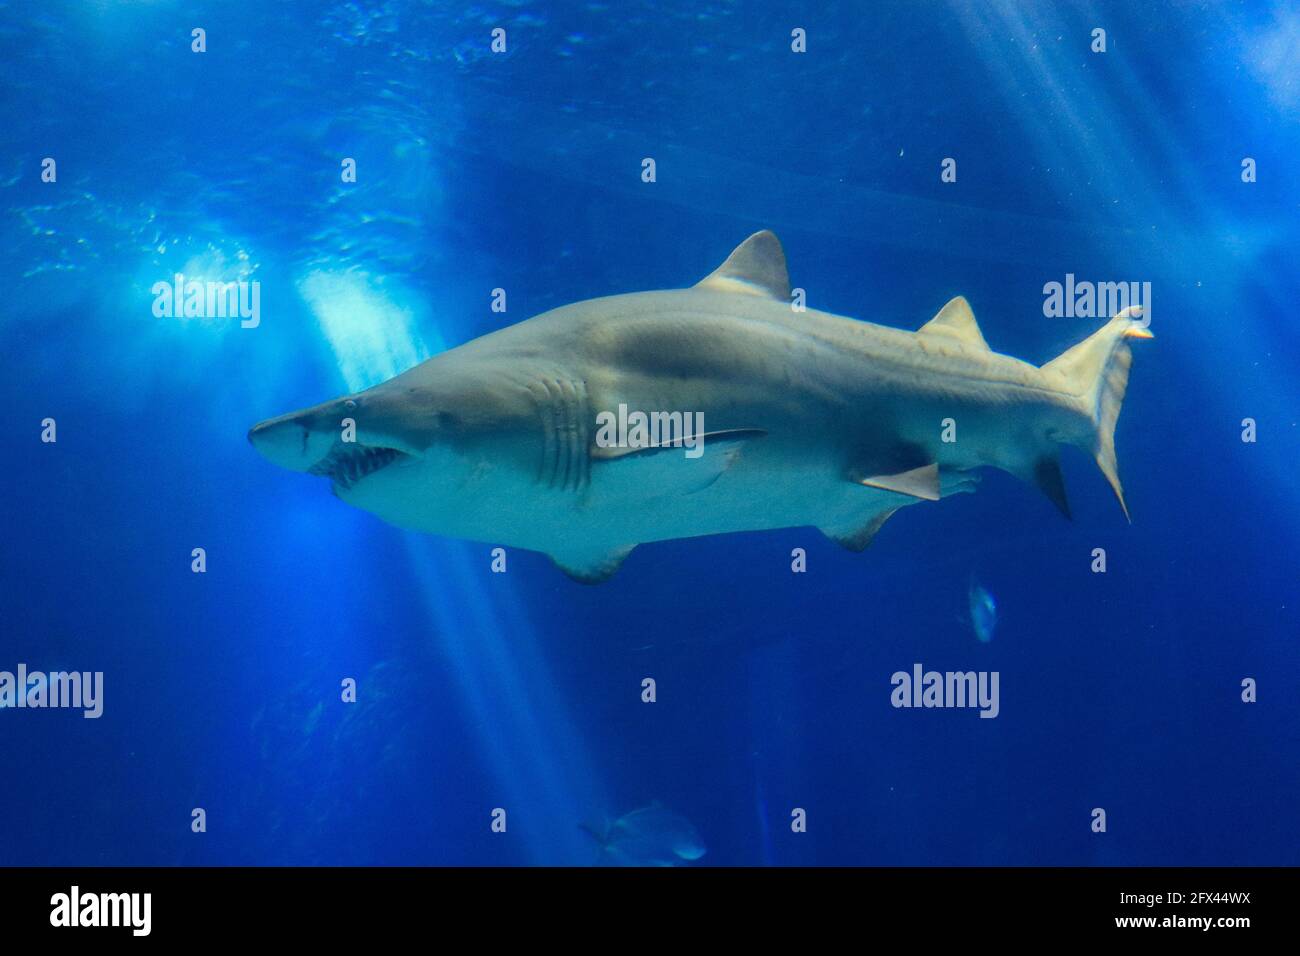 Shark posing in the deep blue water Stock Photo